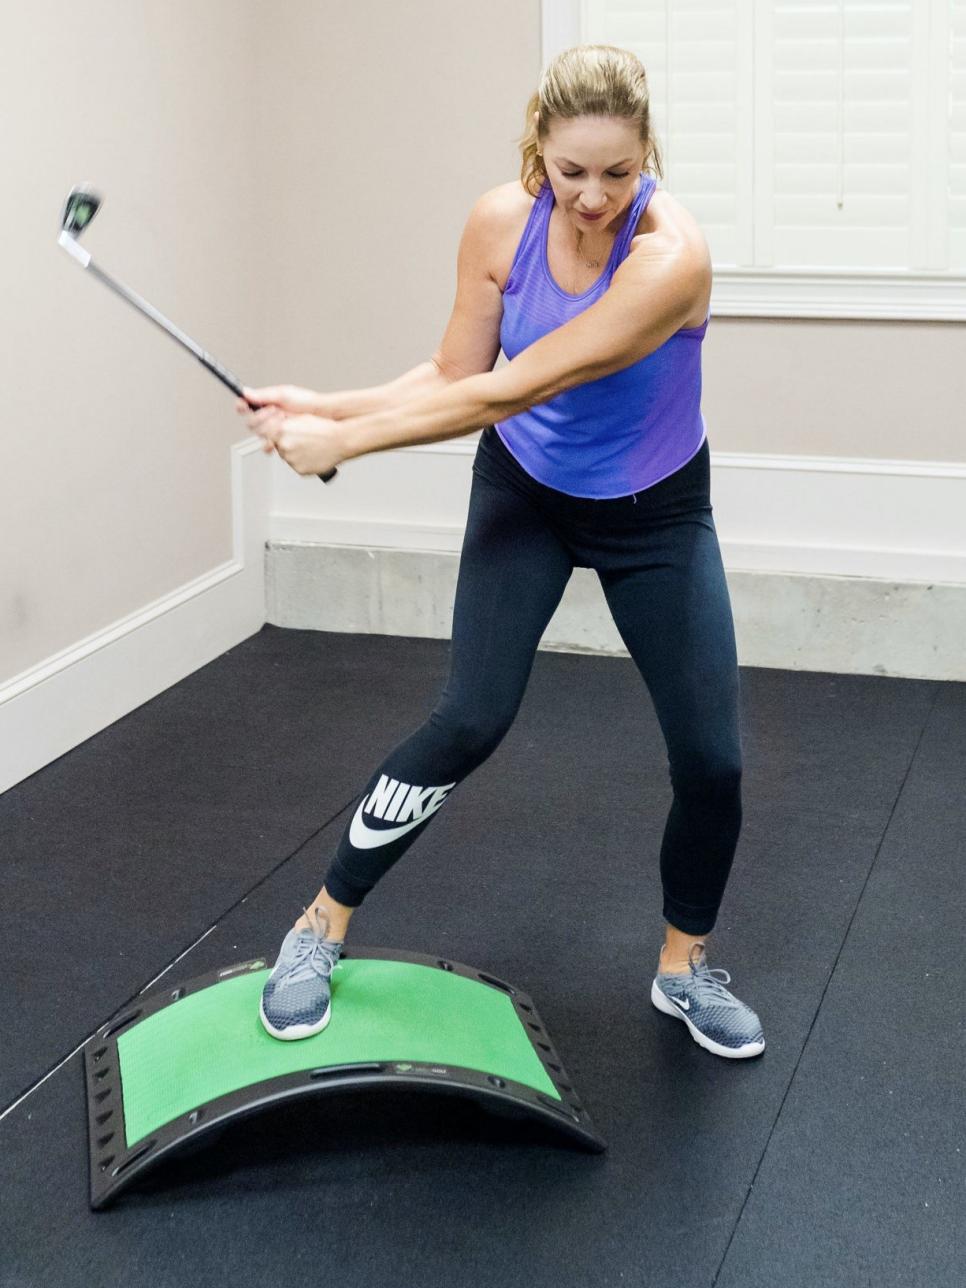 Amp up your golf performance with this easy cardio routine – Australian Golf Digest